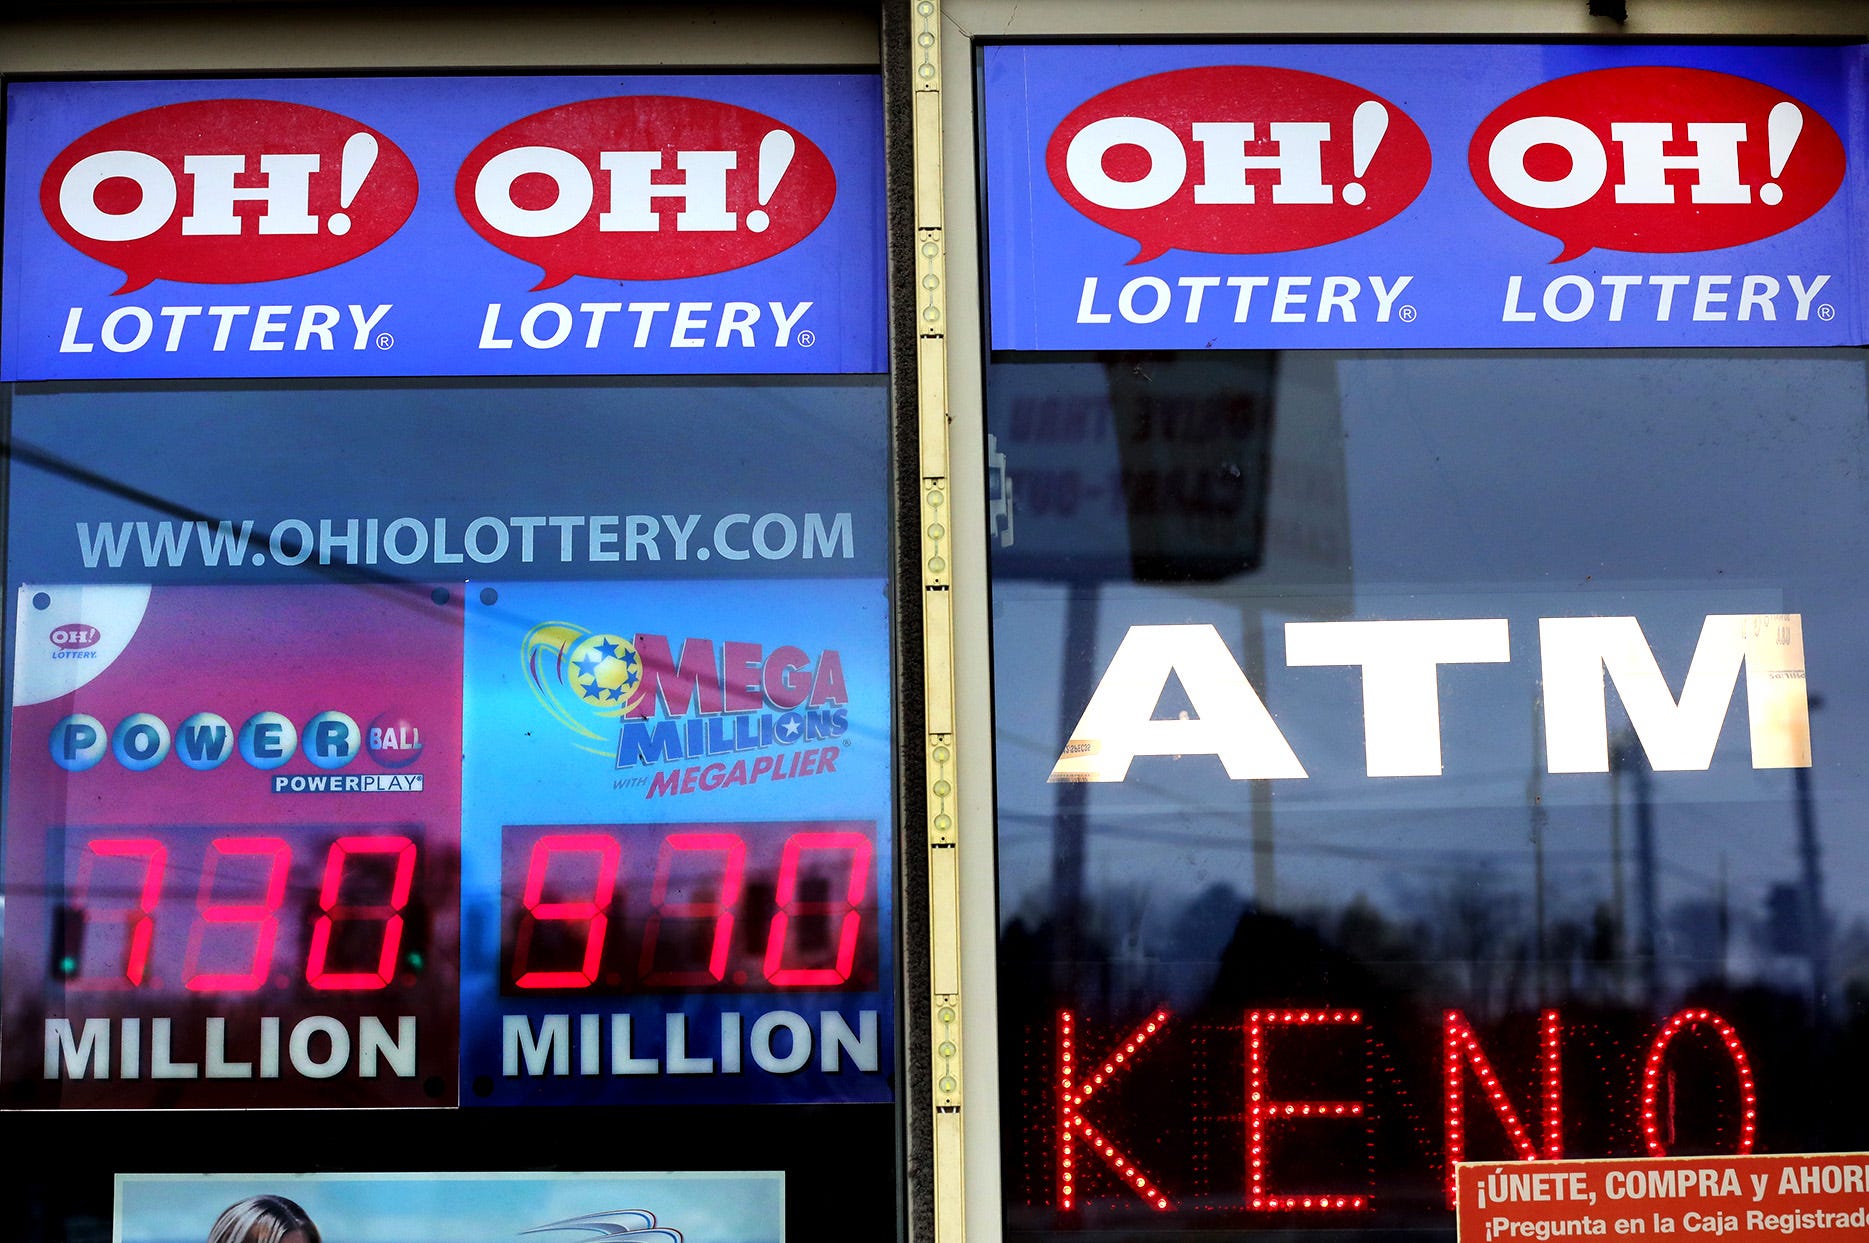 Ohio Lottery director retired after harassment allegations, new report says